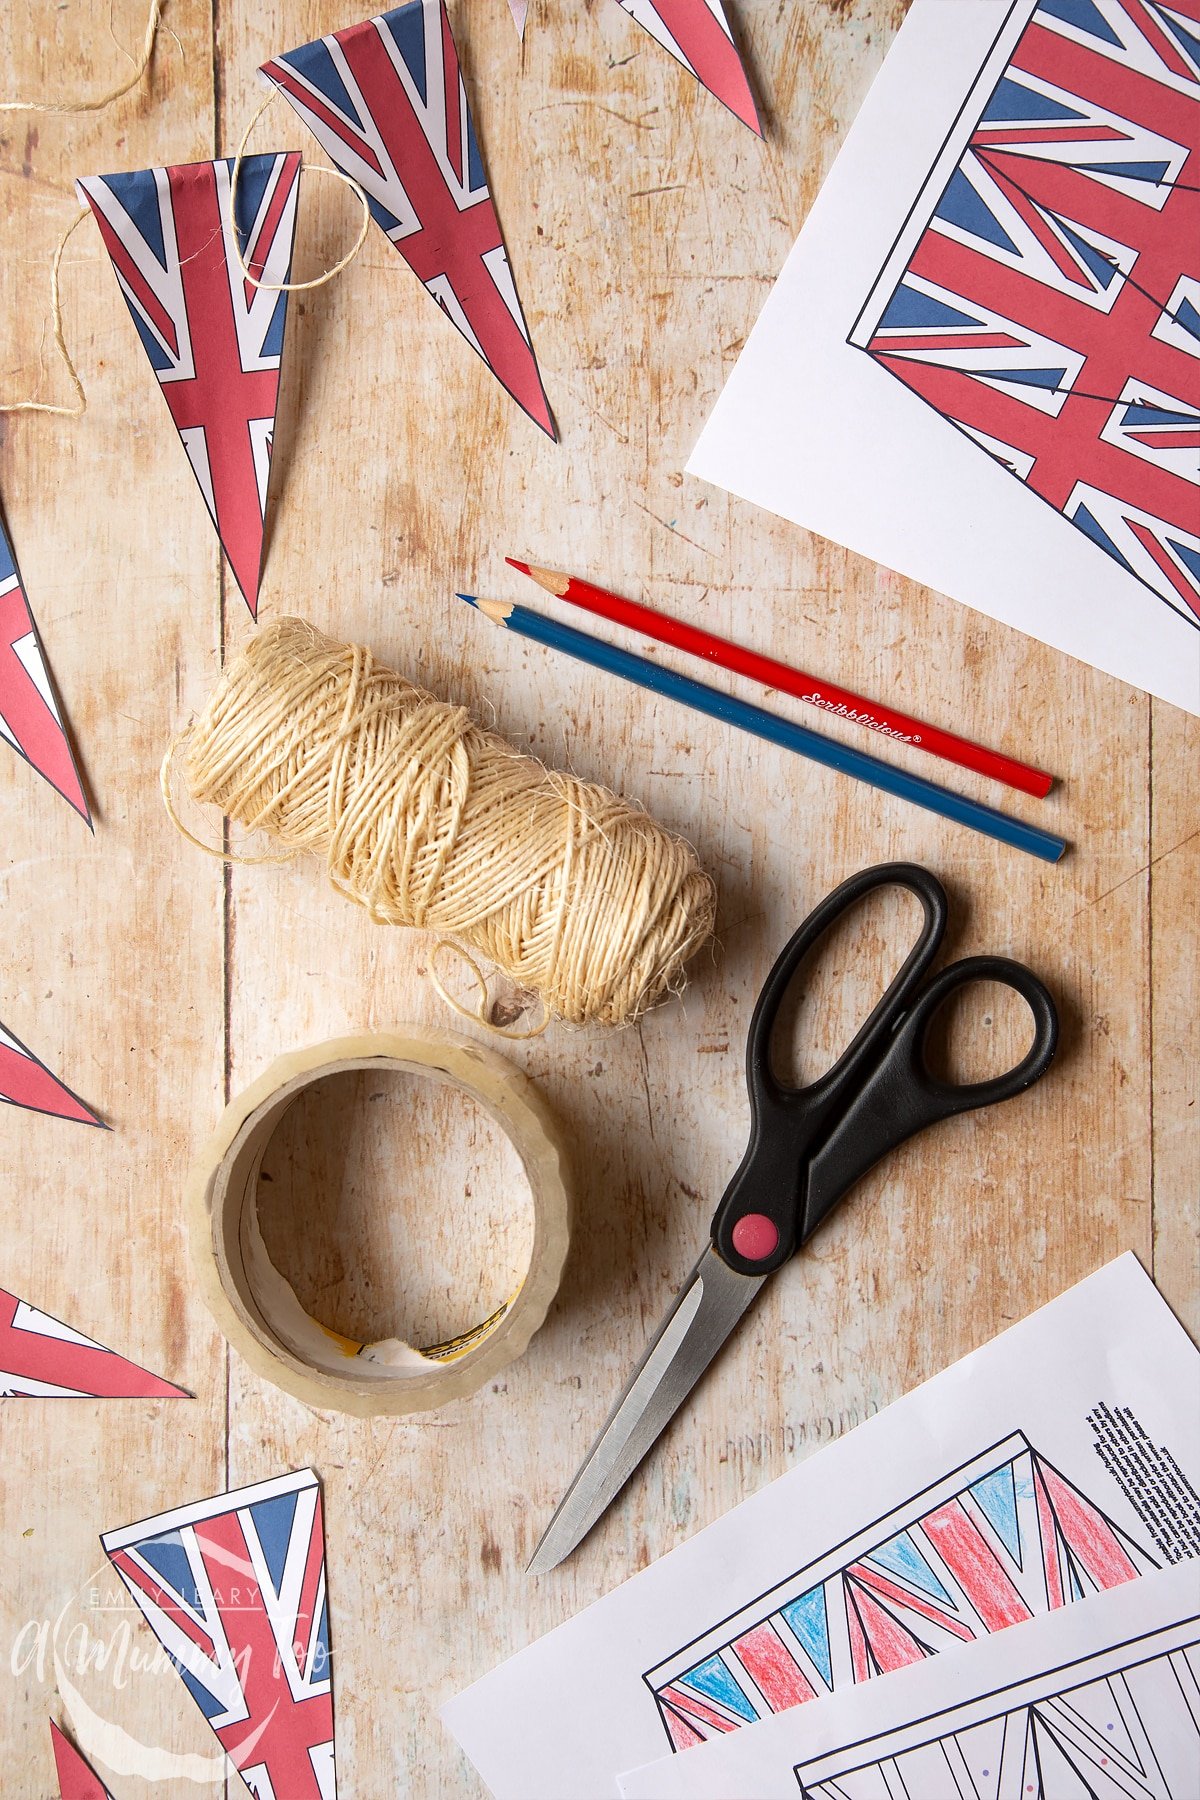 string, scissors, colouring pencils and union jack bunting printed out and laid out on a wooden backdrop.